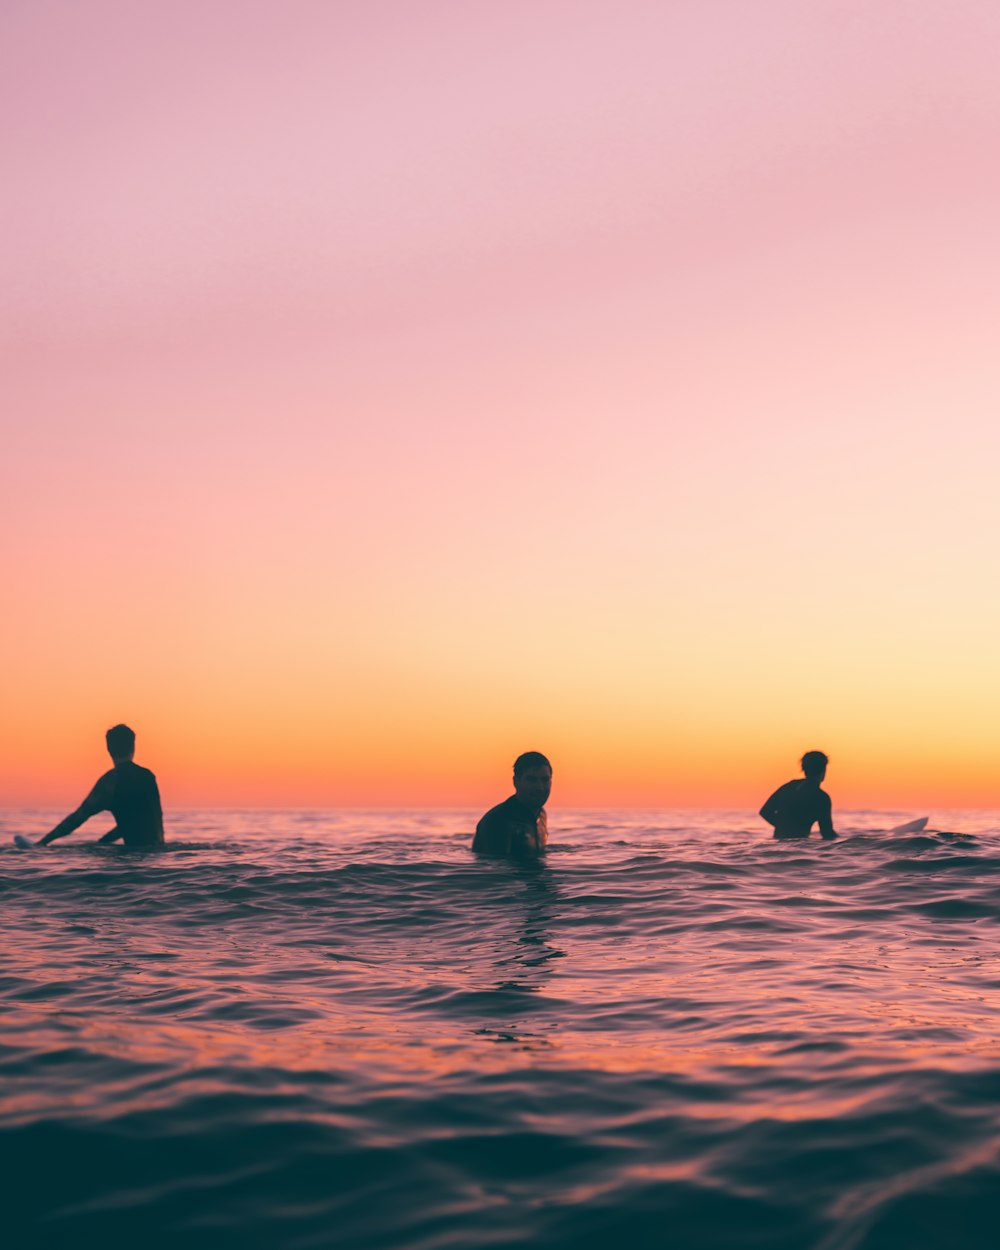 a group of people riding surfboards on top of a body of water